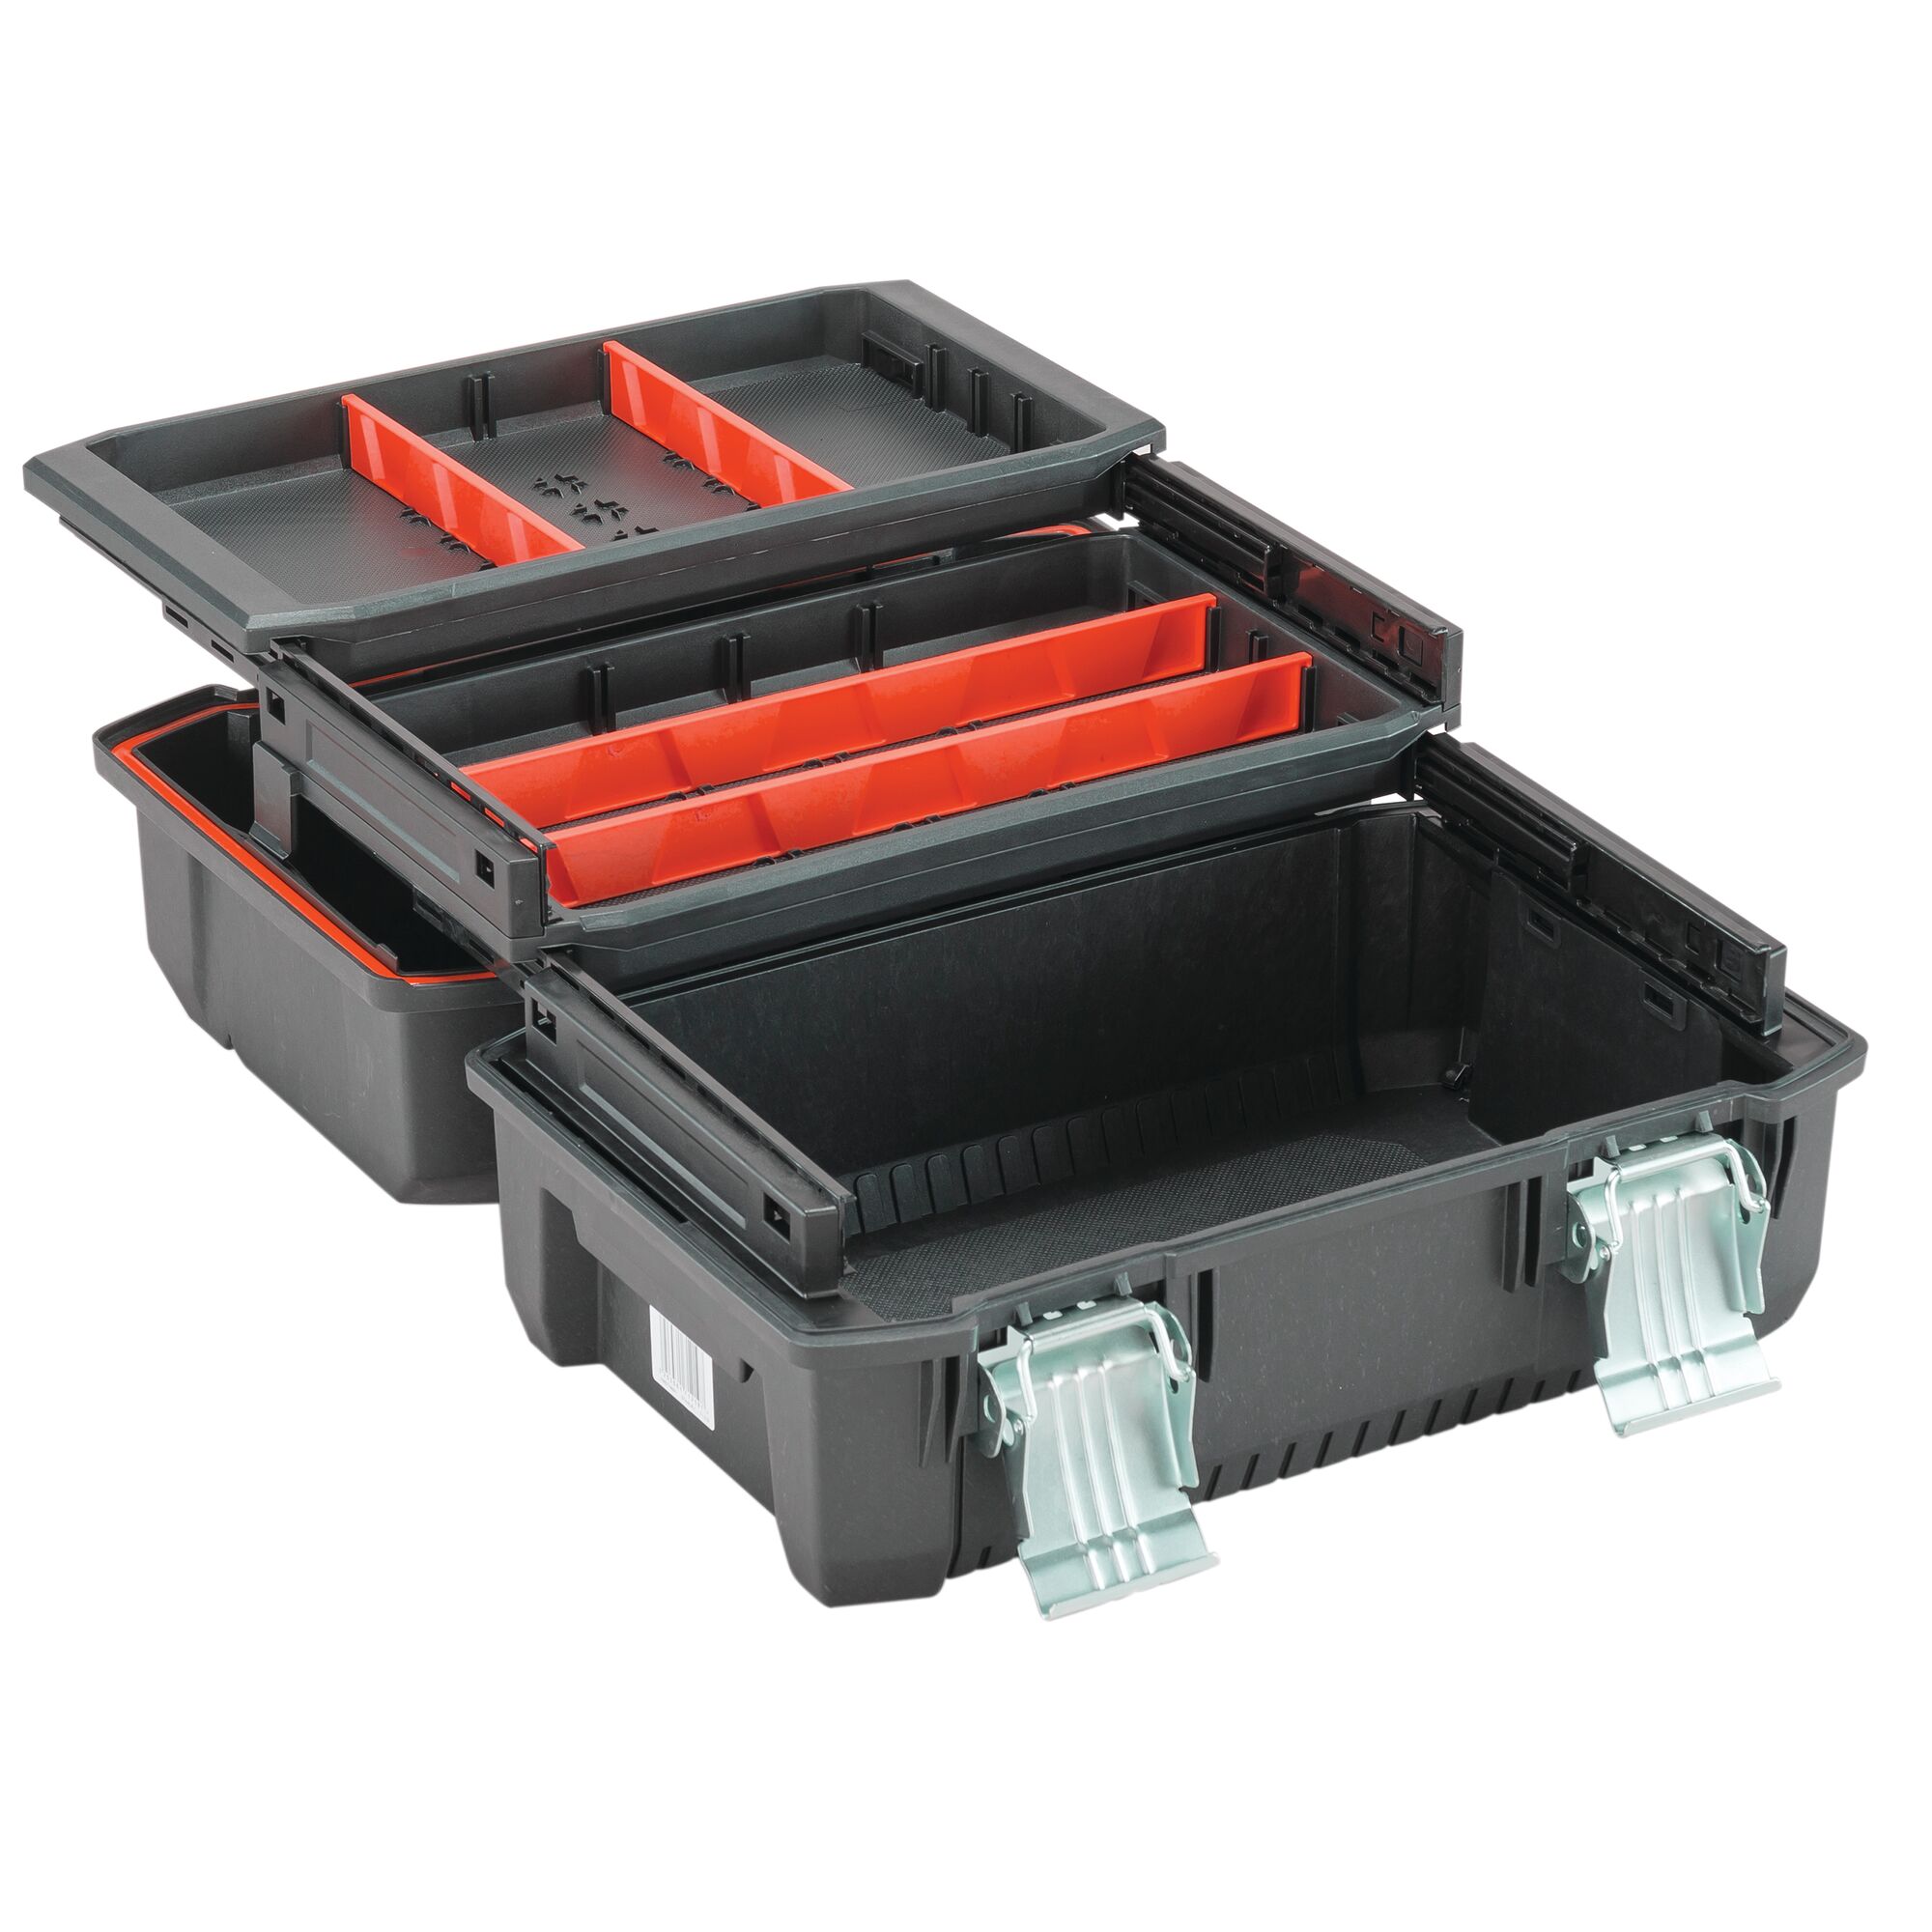 Metal latches feature of 18 inch Cantilever tool box.